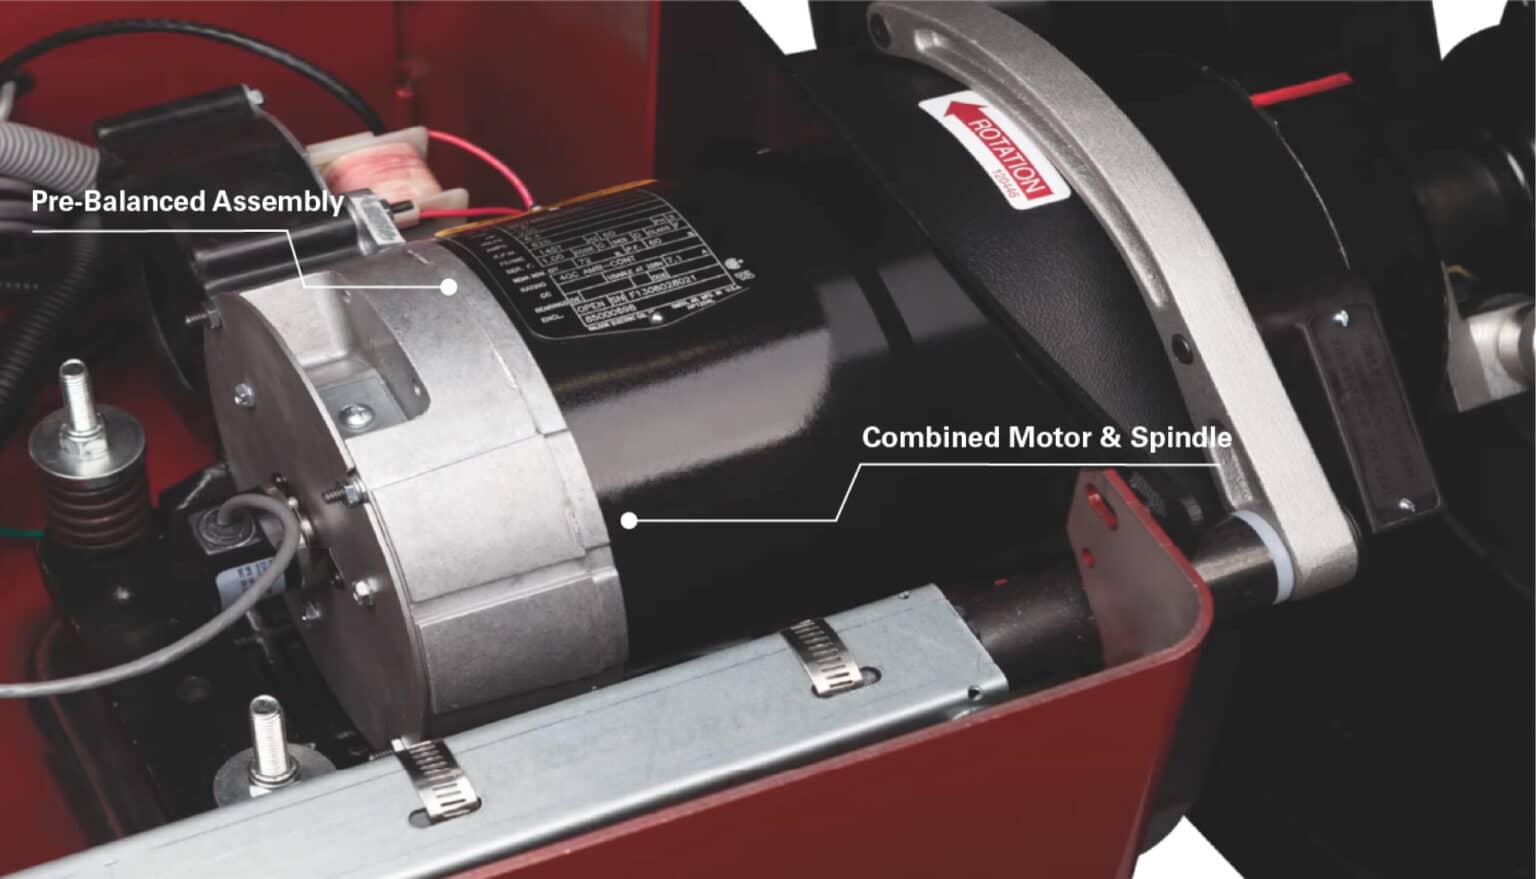 A Coats direct drive motor with callouts that say “prebalanced assembly,” and “combined motor spindle